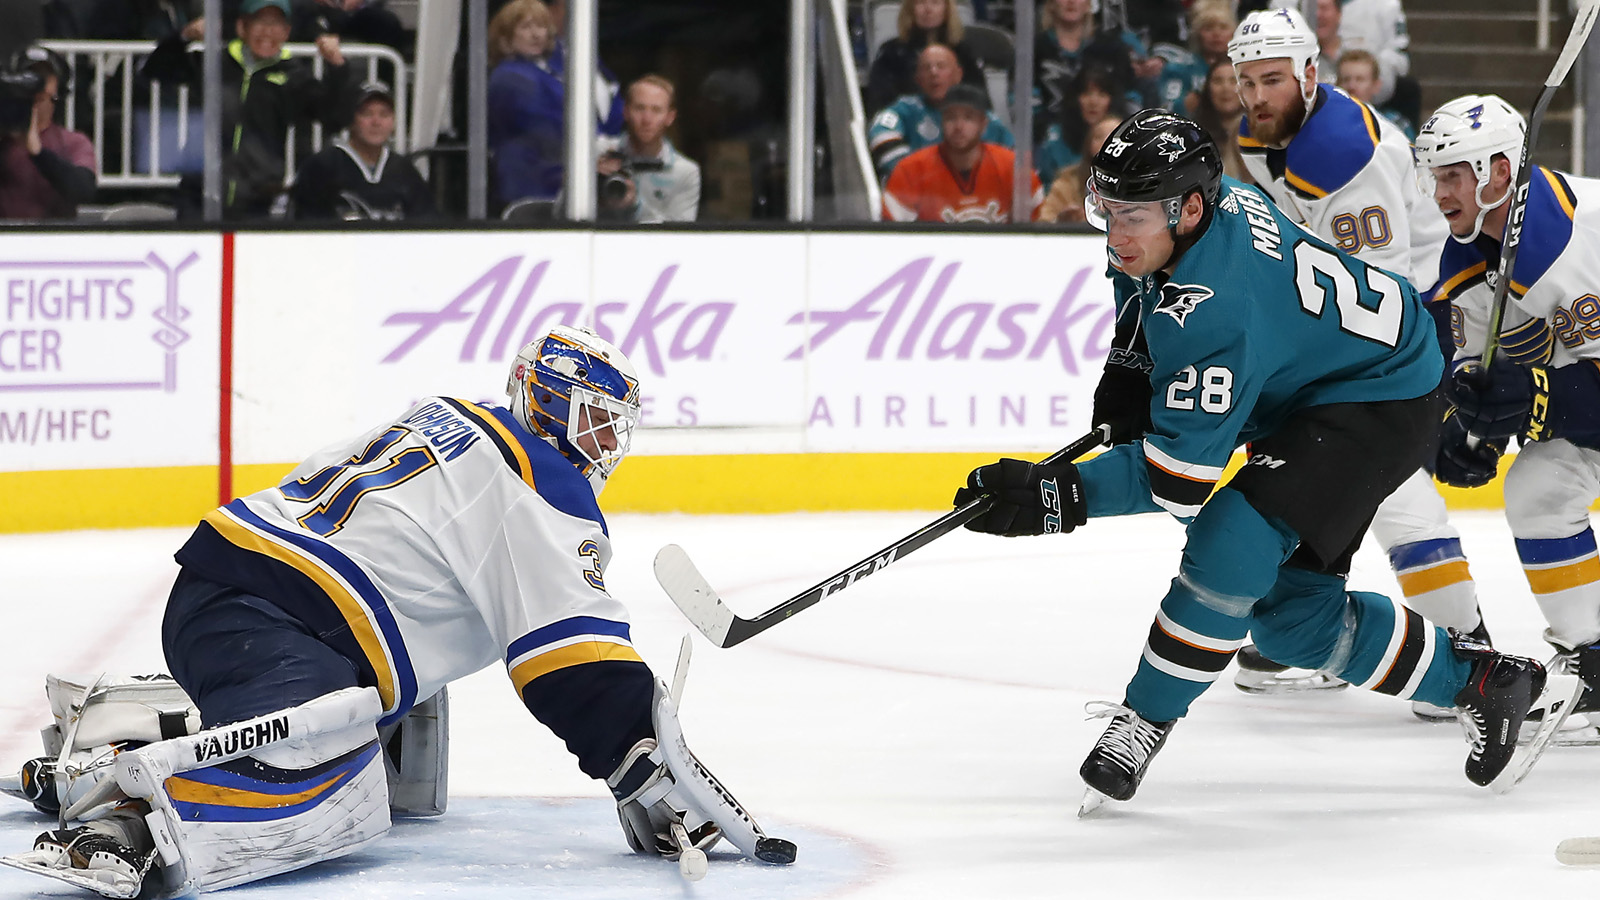 Blues suffer second shutout loss in three games, 4-0 to Sharks